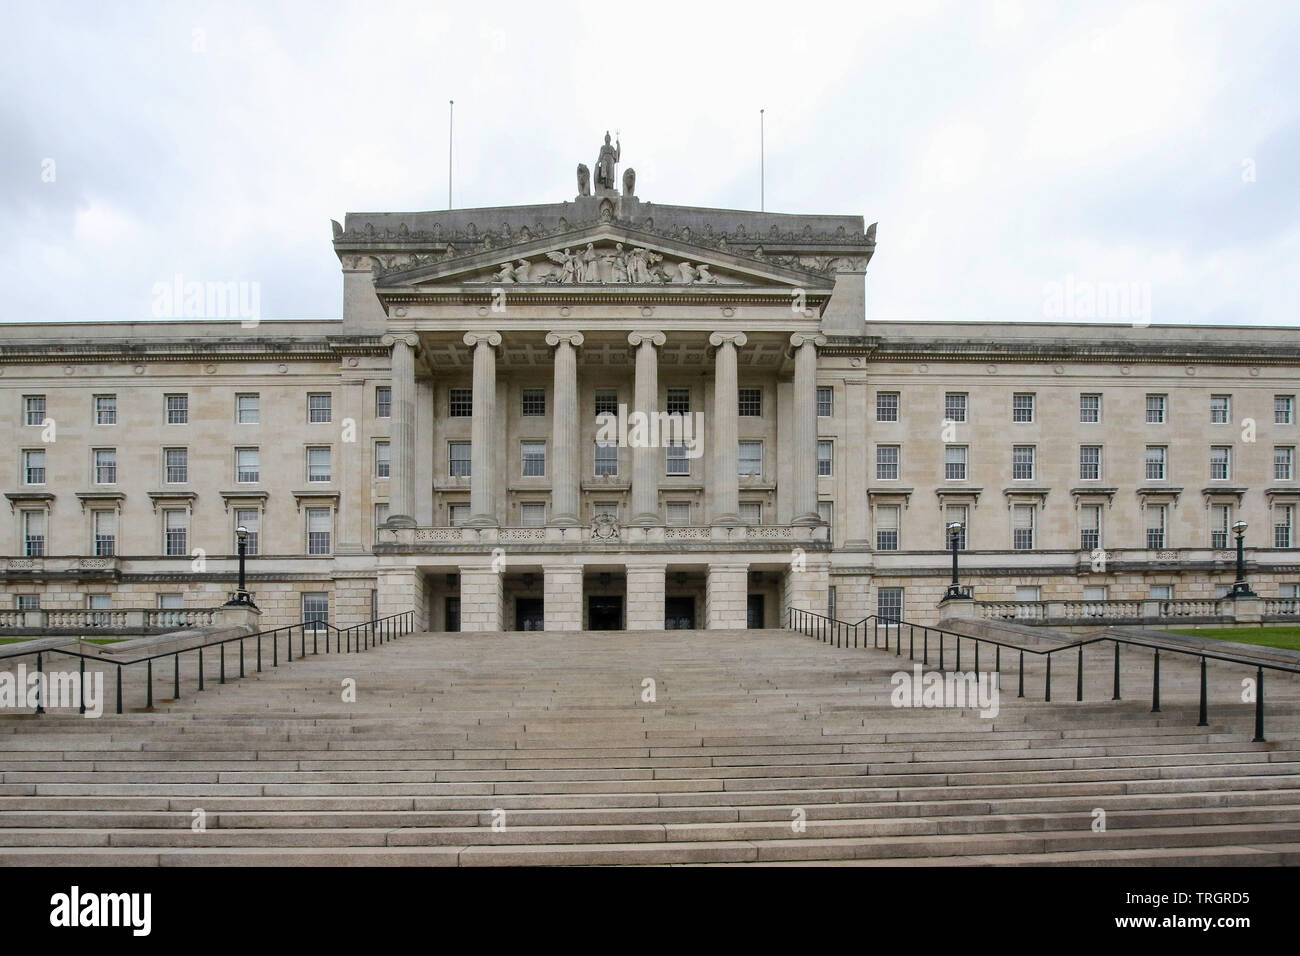 The front of Stormont, the building that houses the Northern Ireland Assembly, looking up the steps of Stormont at the portico and front façade, Stock Photo